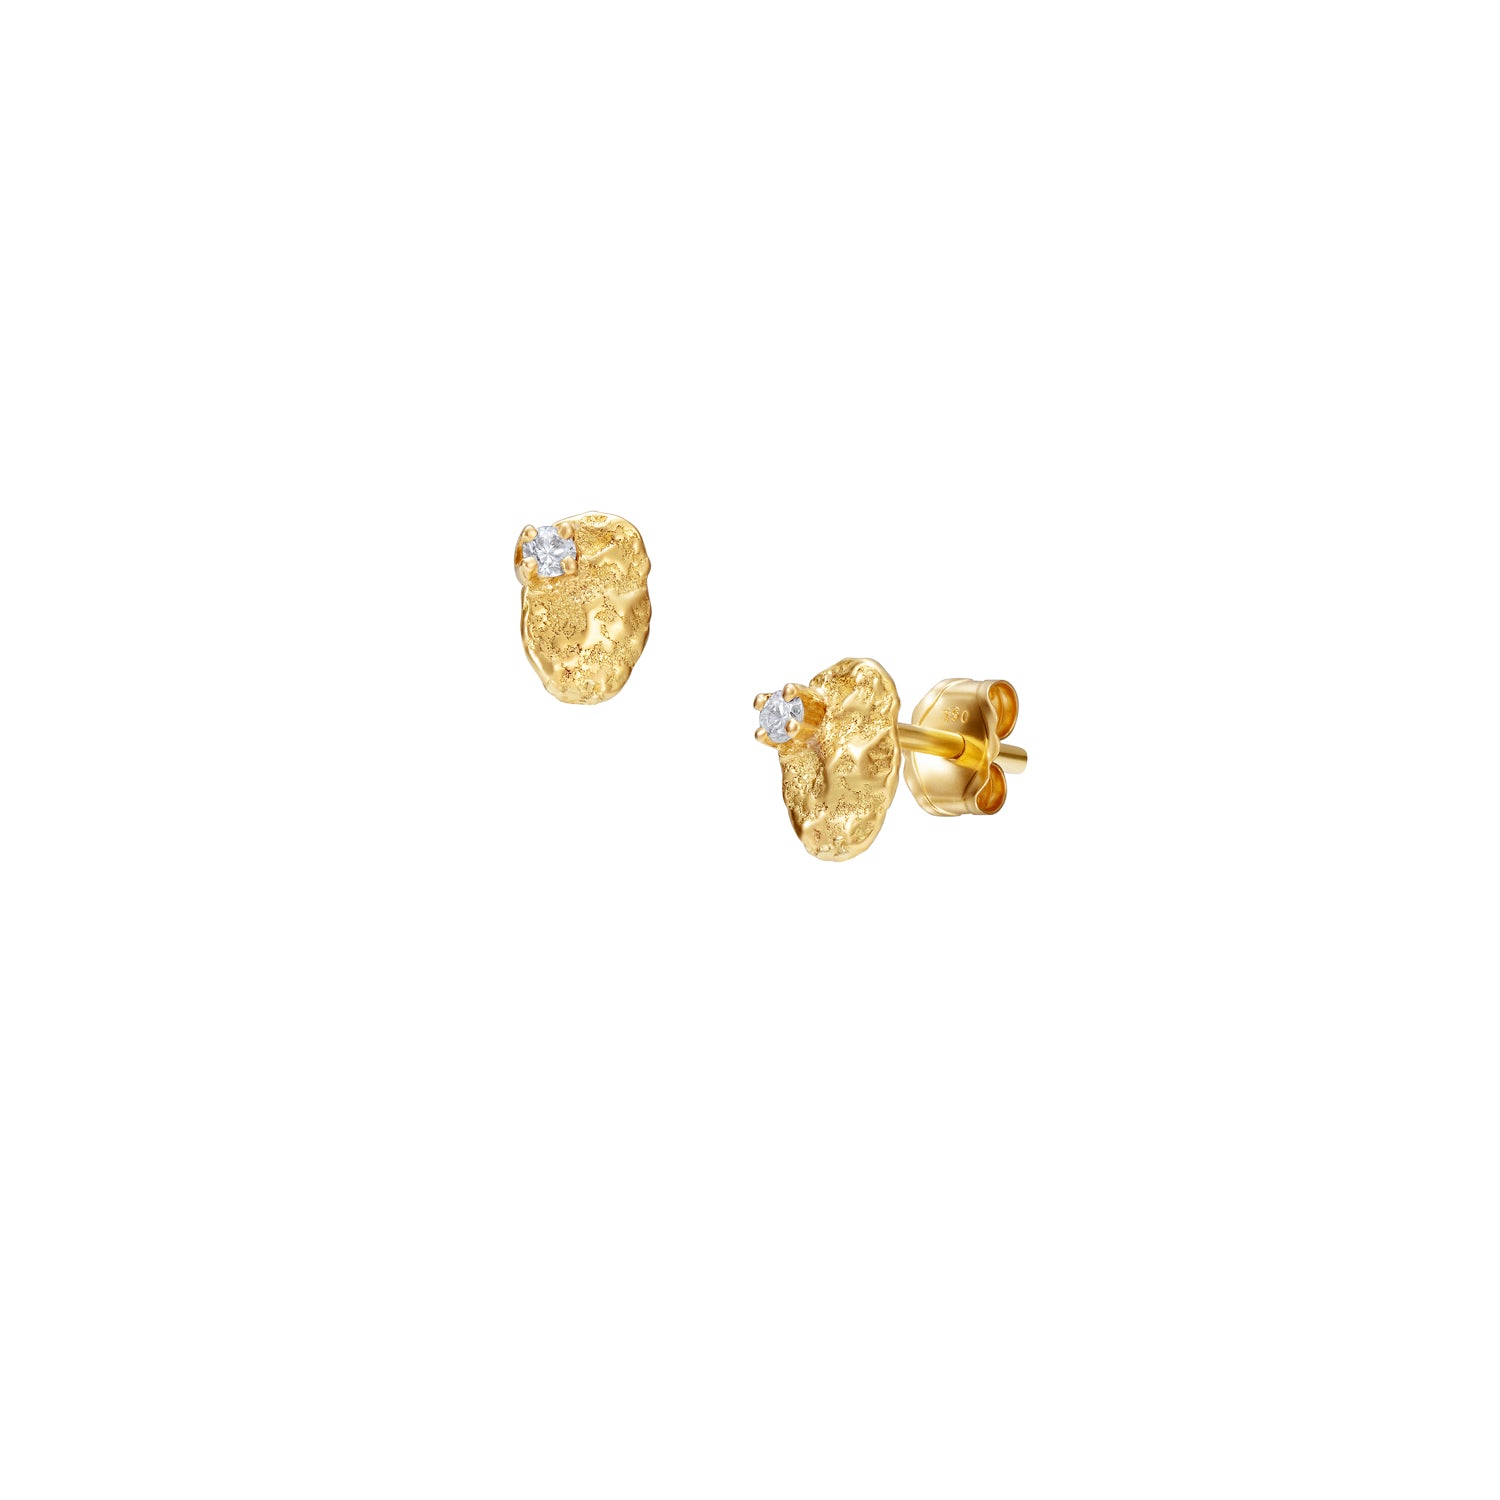 Sweet Pea Moonscape recycled 18ct yellow gold nugget stud earring set with white diamonds.